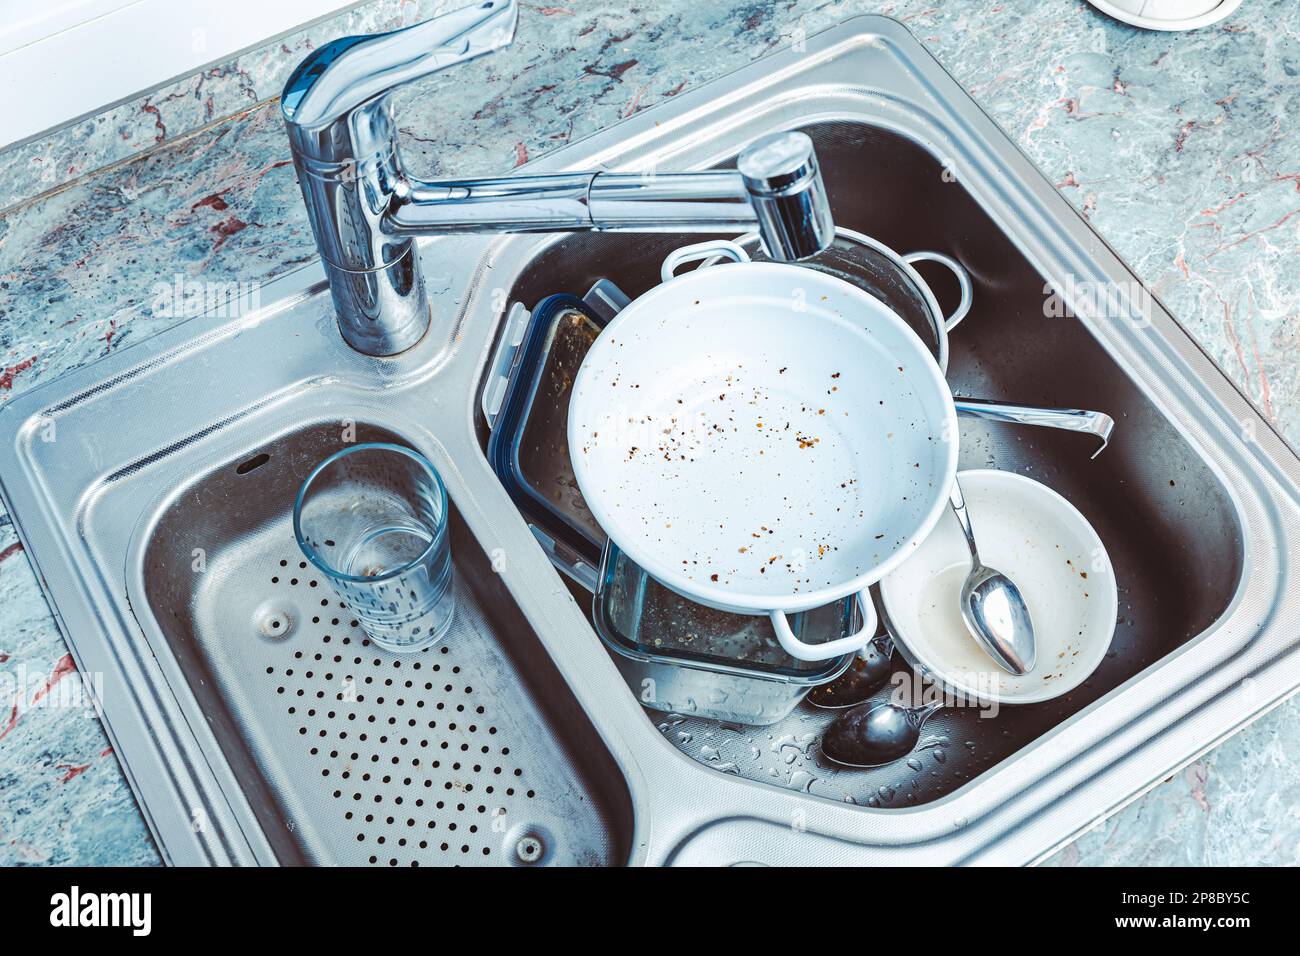 Dishwashing - pile of dirty dishes in kitchen sink Stock Photo - Alamy